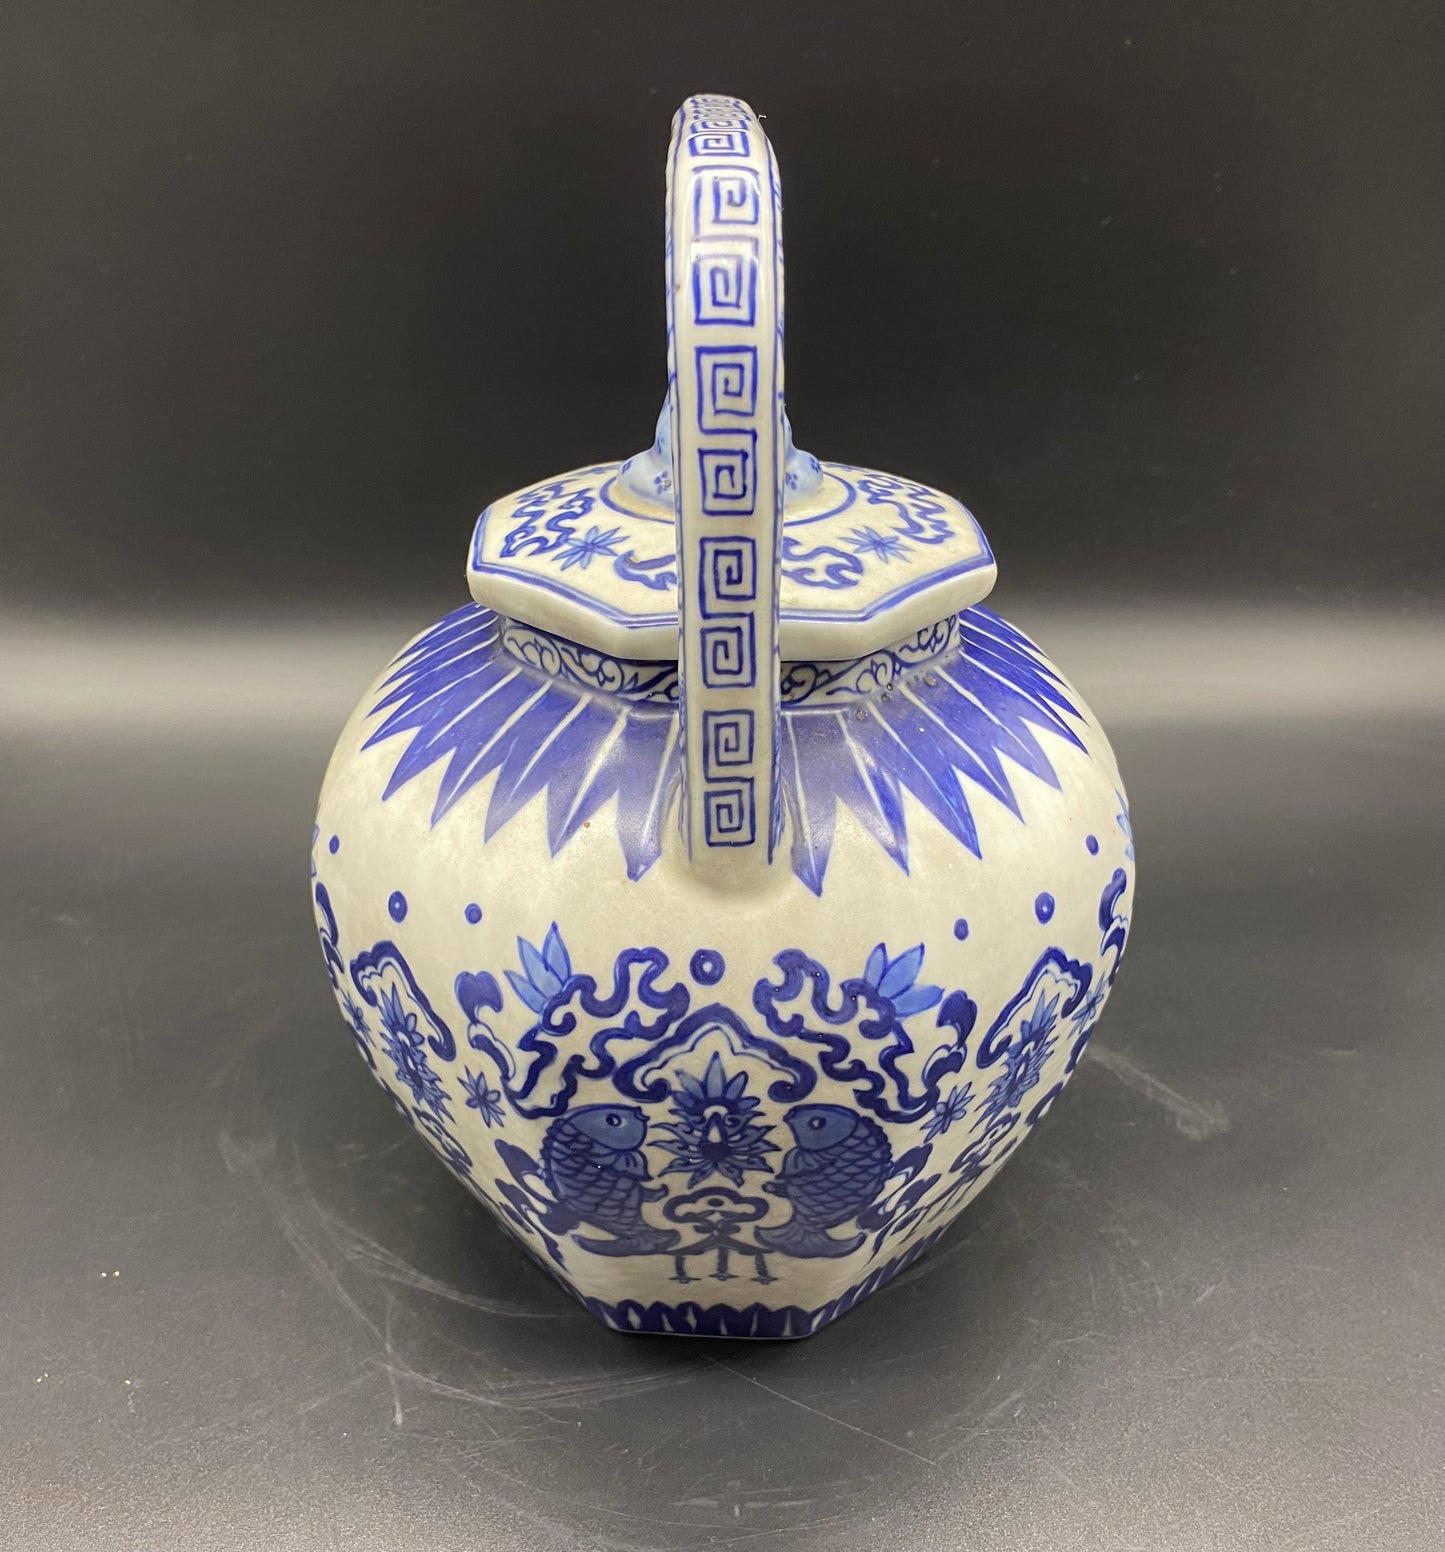 Chinese Porcelain Teapot Blue and White decoration, Qianlong period – 18th Century